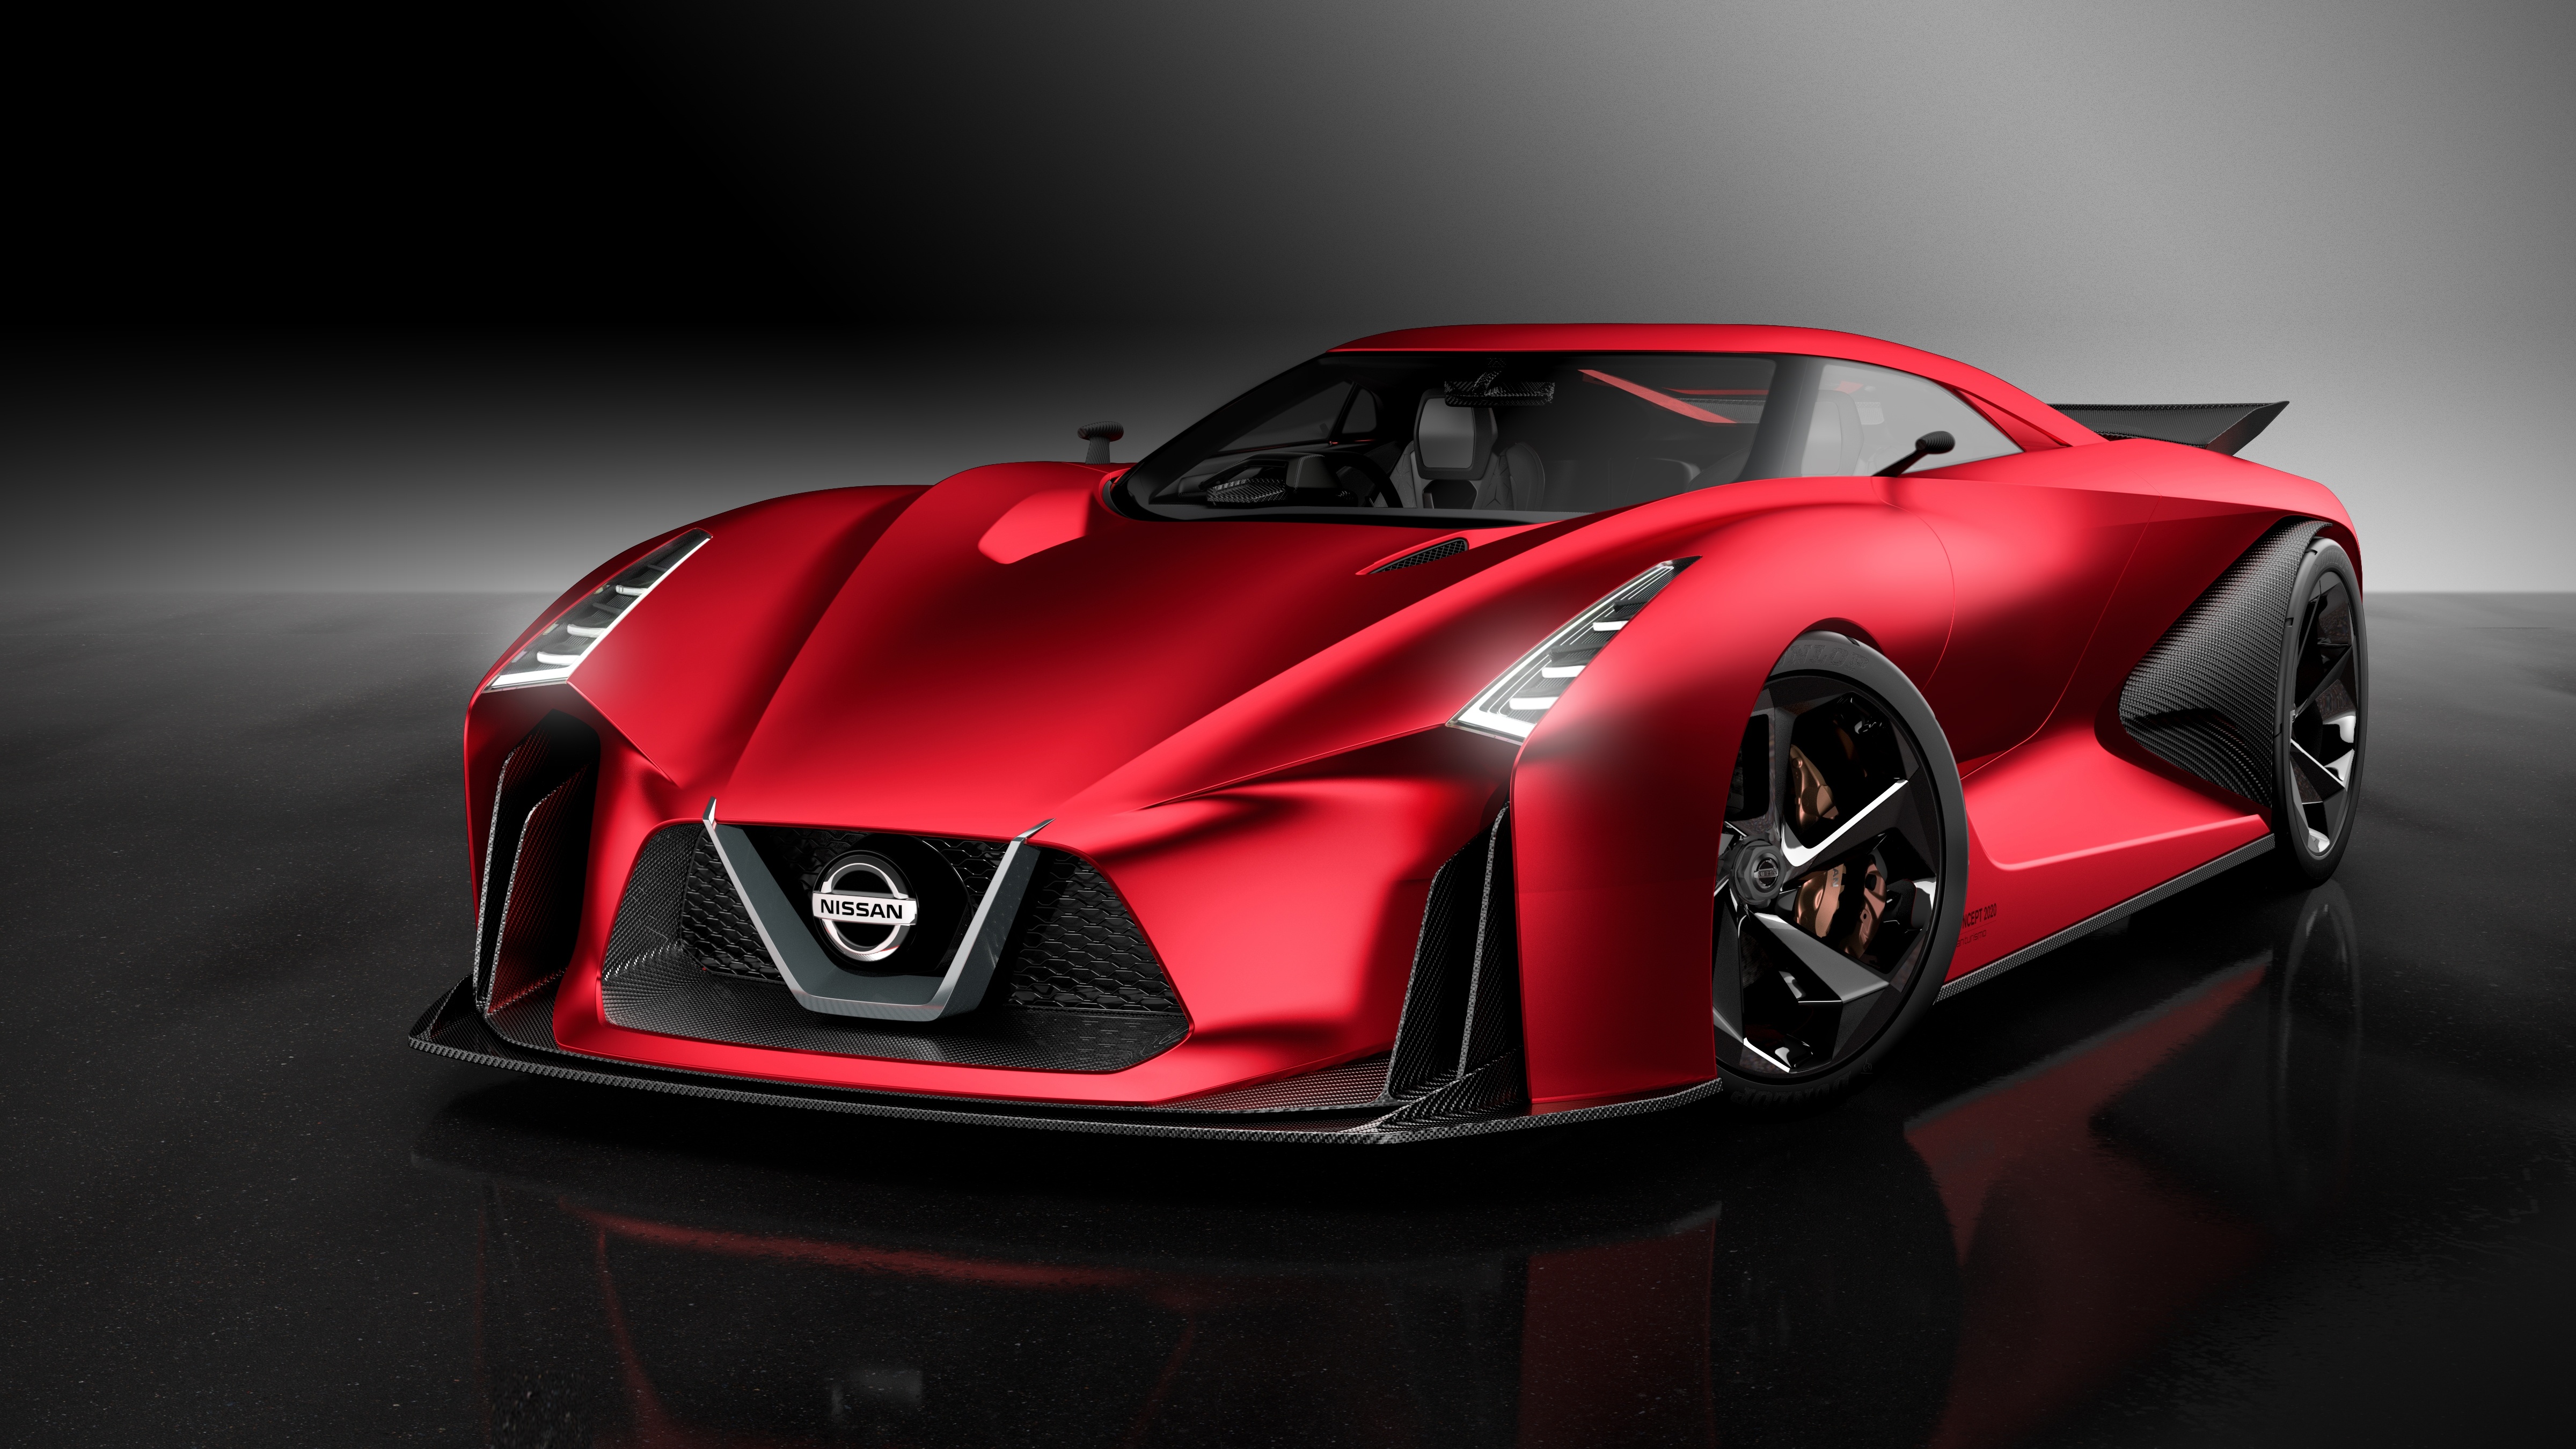 Nissan Concept 2020 Vision Gran Turismo Displayed at Launch of New Grand Turismo Sport Video Game